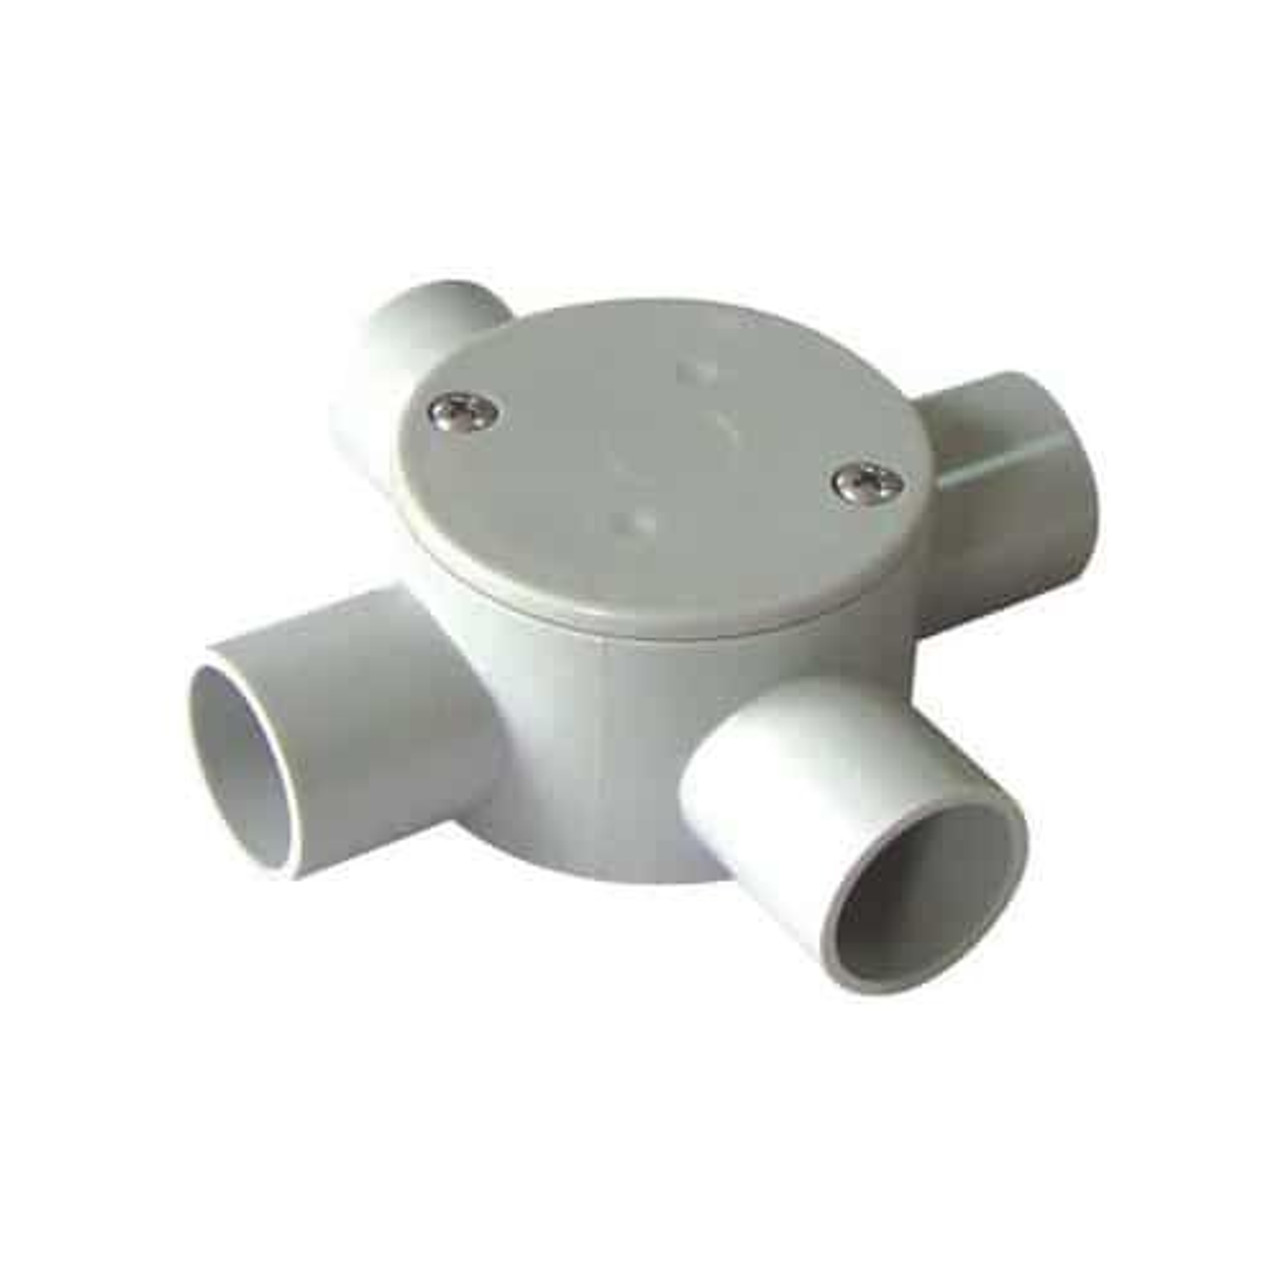 PVC RIGID JUNCTION BOX STANDARD WITH 4 x 25MM CONDUIT CONNECTIONS GREY